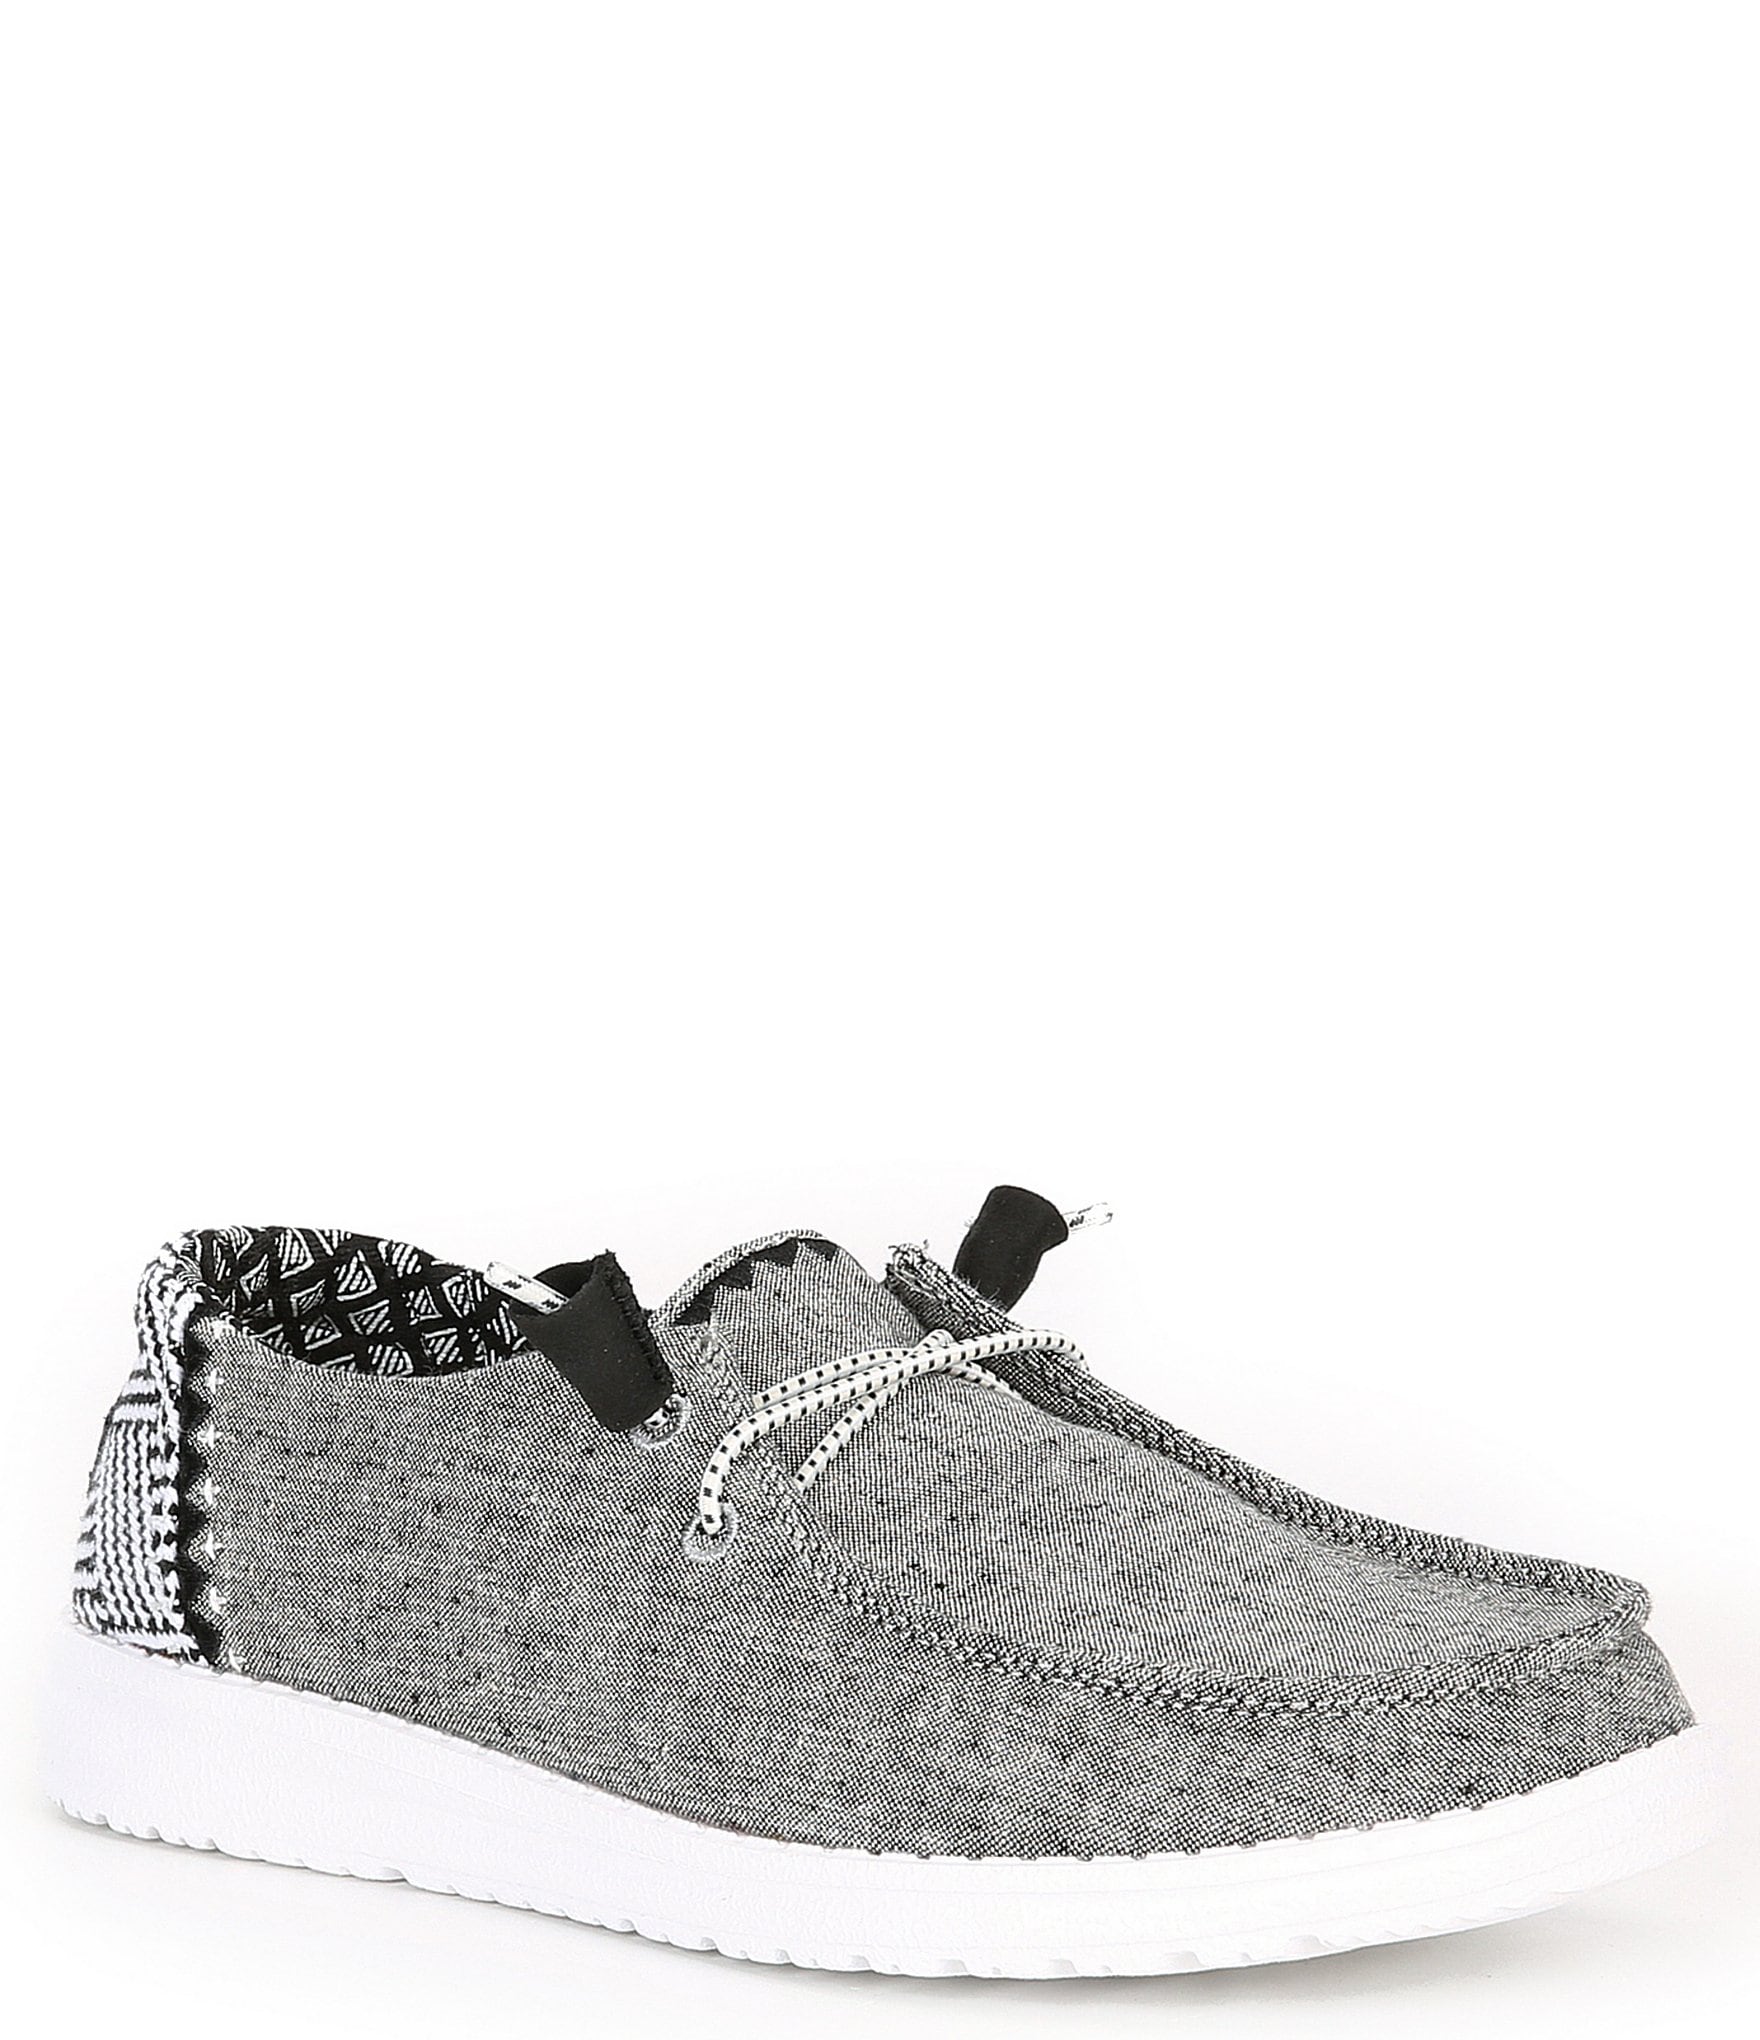 Women's HEYDUDE Wendy Chambray Slip-On Shoes